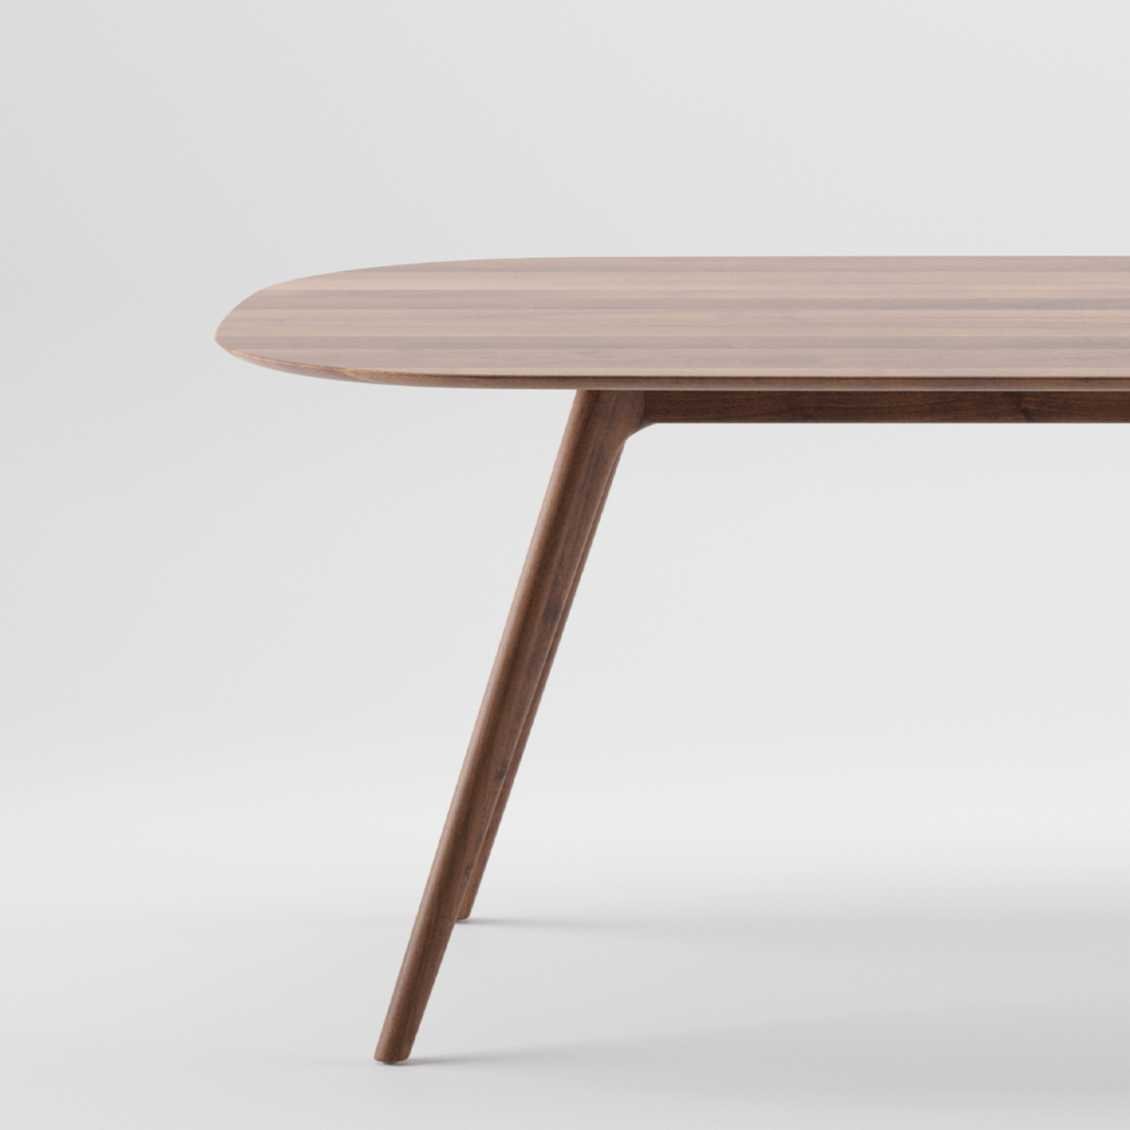 ARTISAN Coco dining table